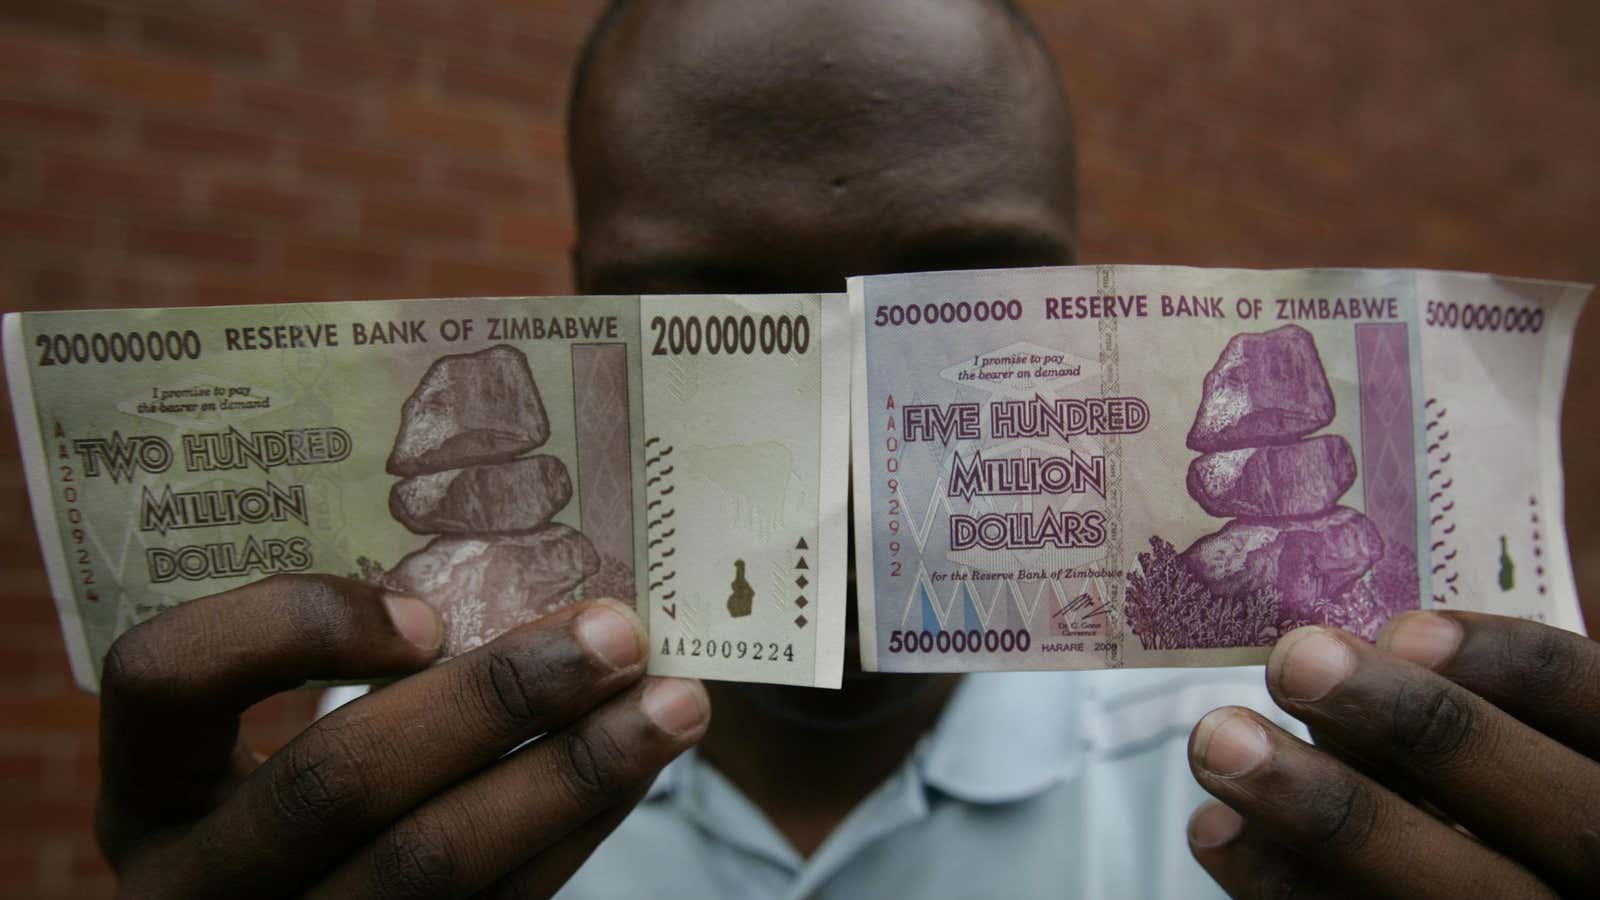 In 2008, Zimbabwe introduced the 200 million dollar note